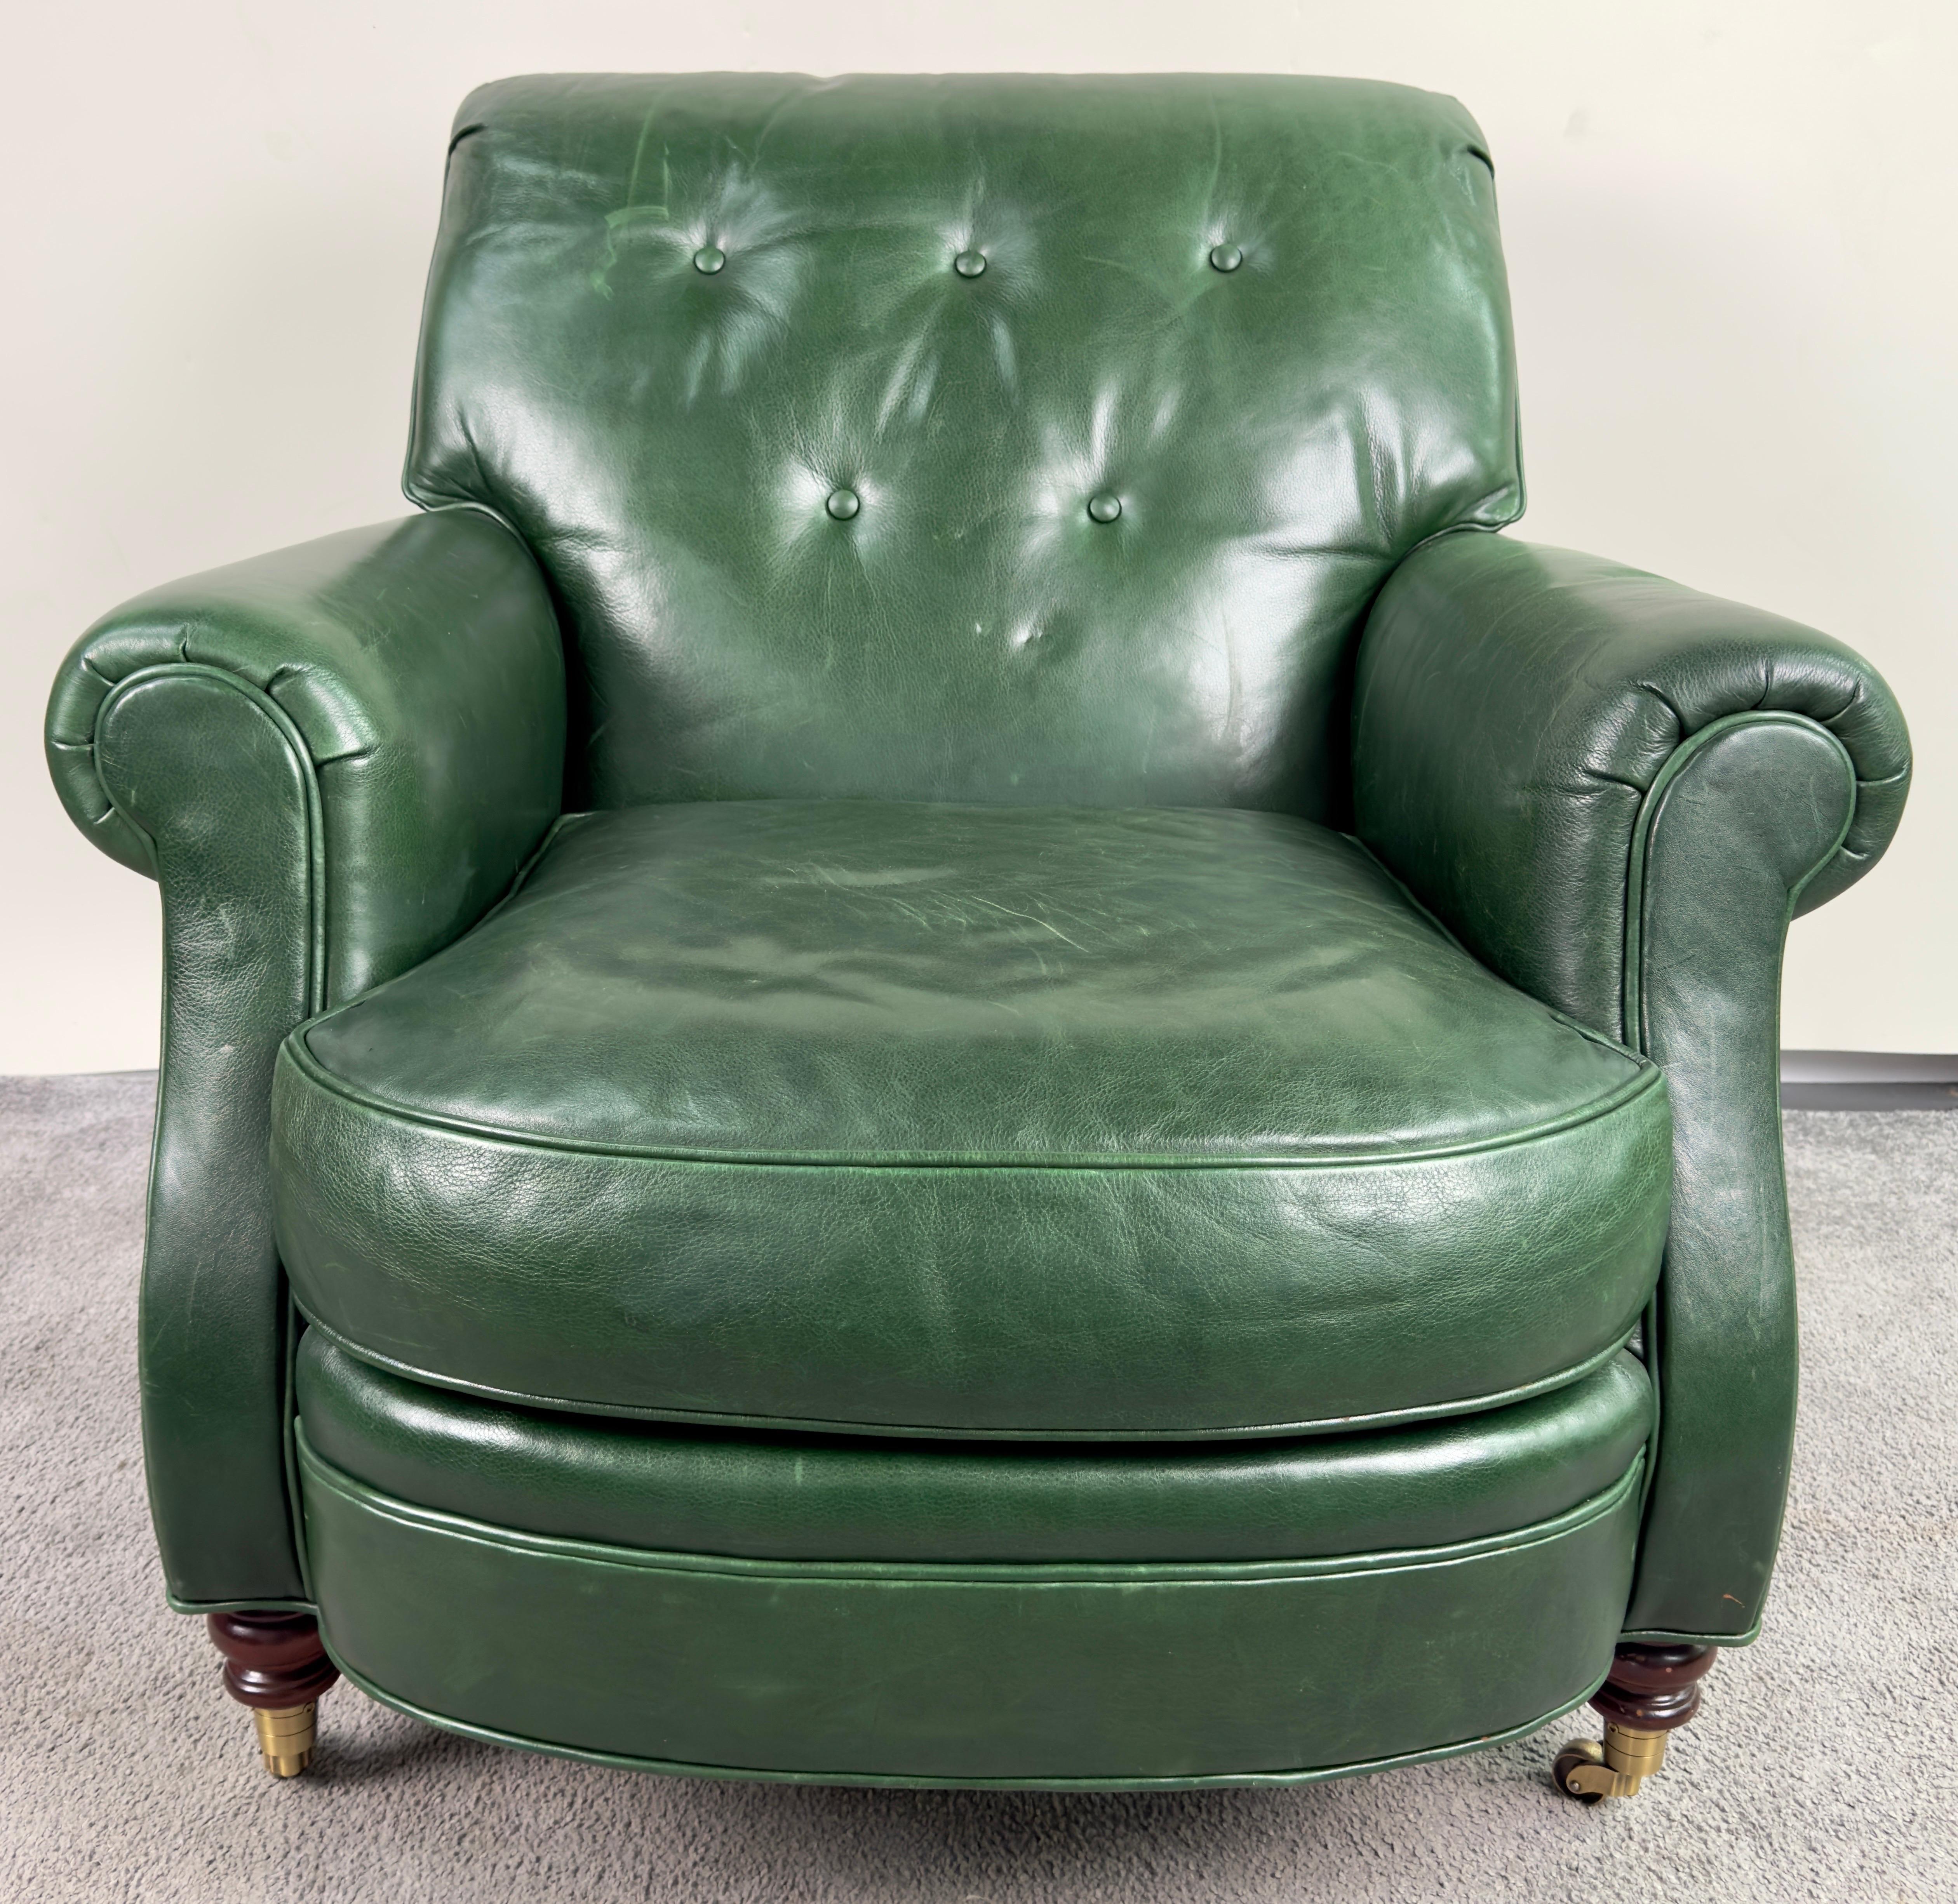 An English style Hickory Club Chair. Crafted in timeless sophistication, this club chair exudes class and comfort. Enveloped in luxurious top-grade green leather upholstery, it boasts a deep, tufted cushion backrest and seat cushion. Embracing you